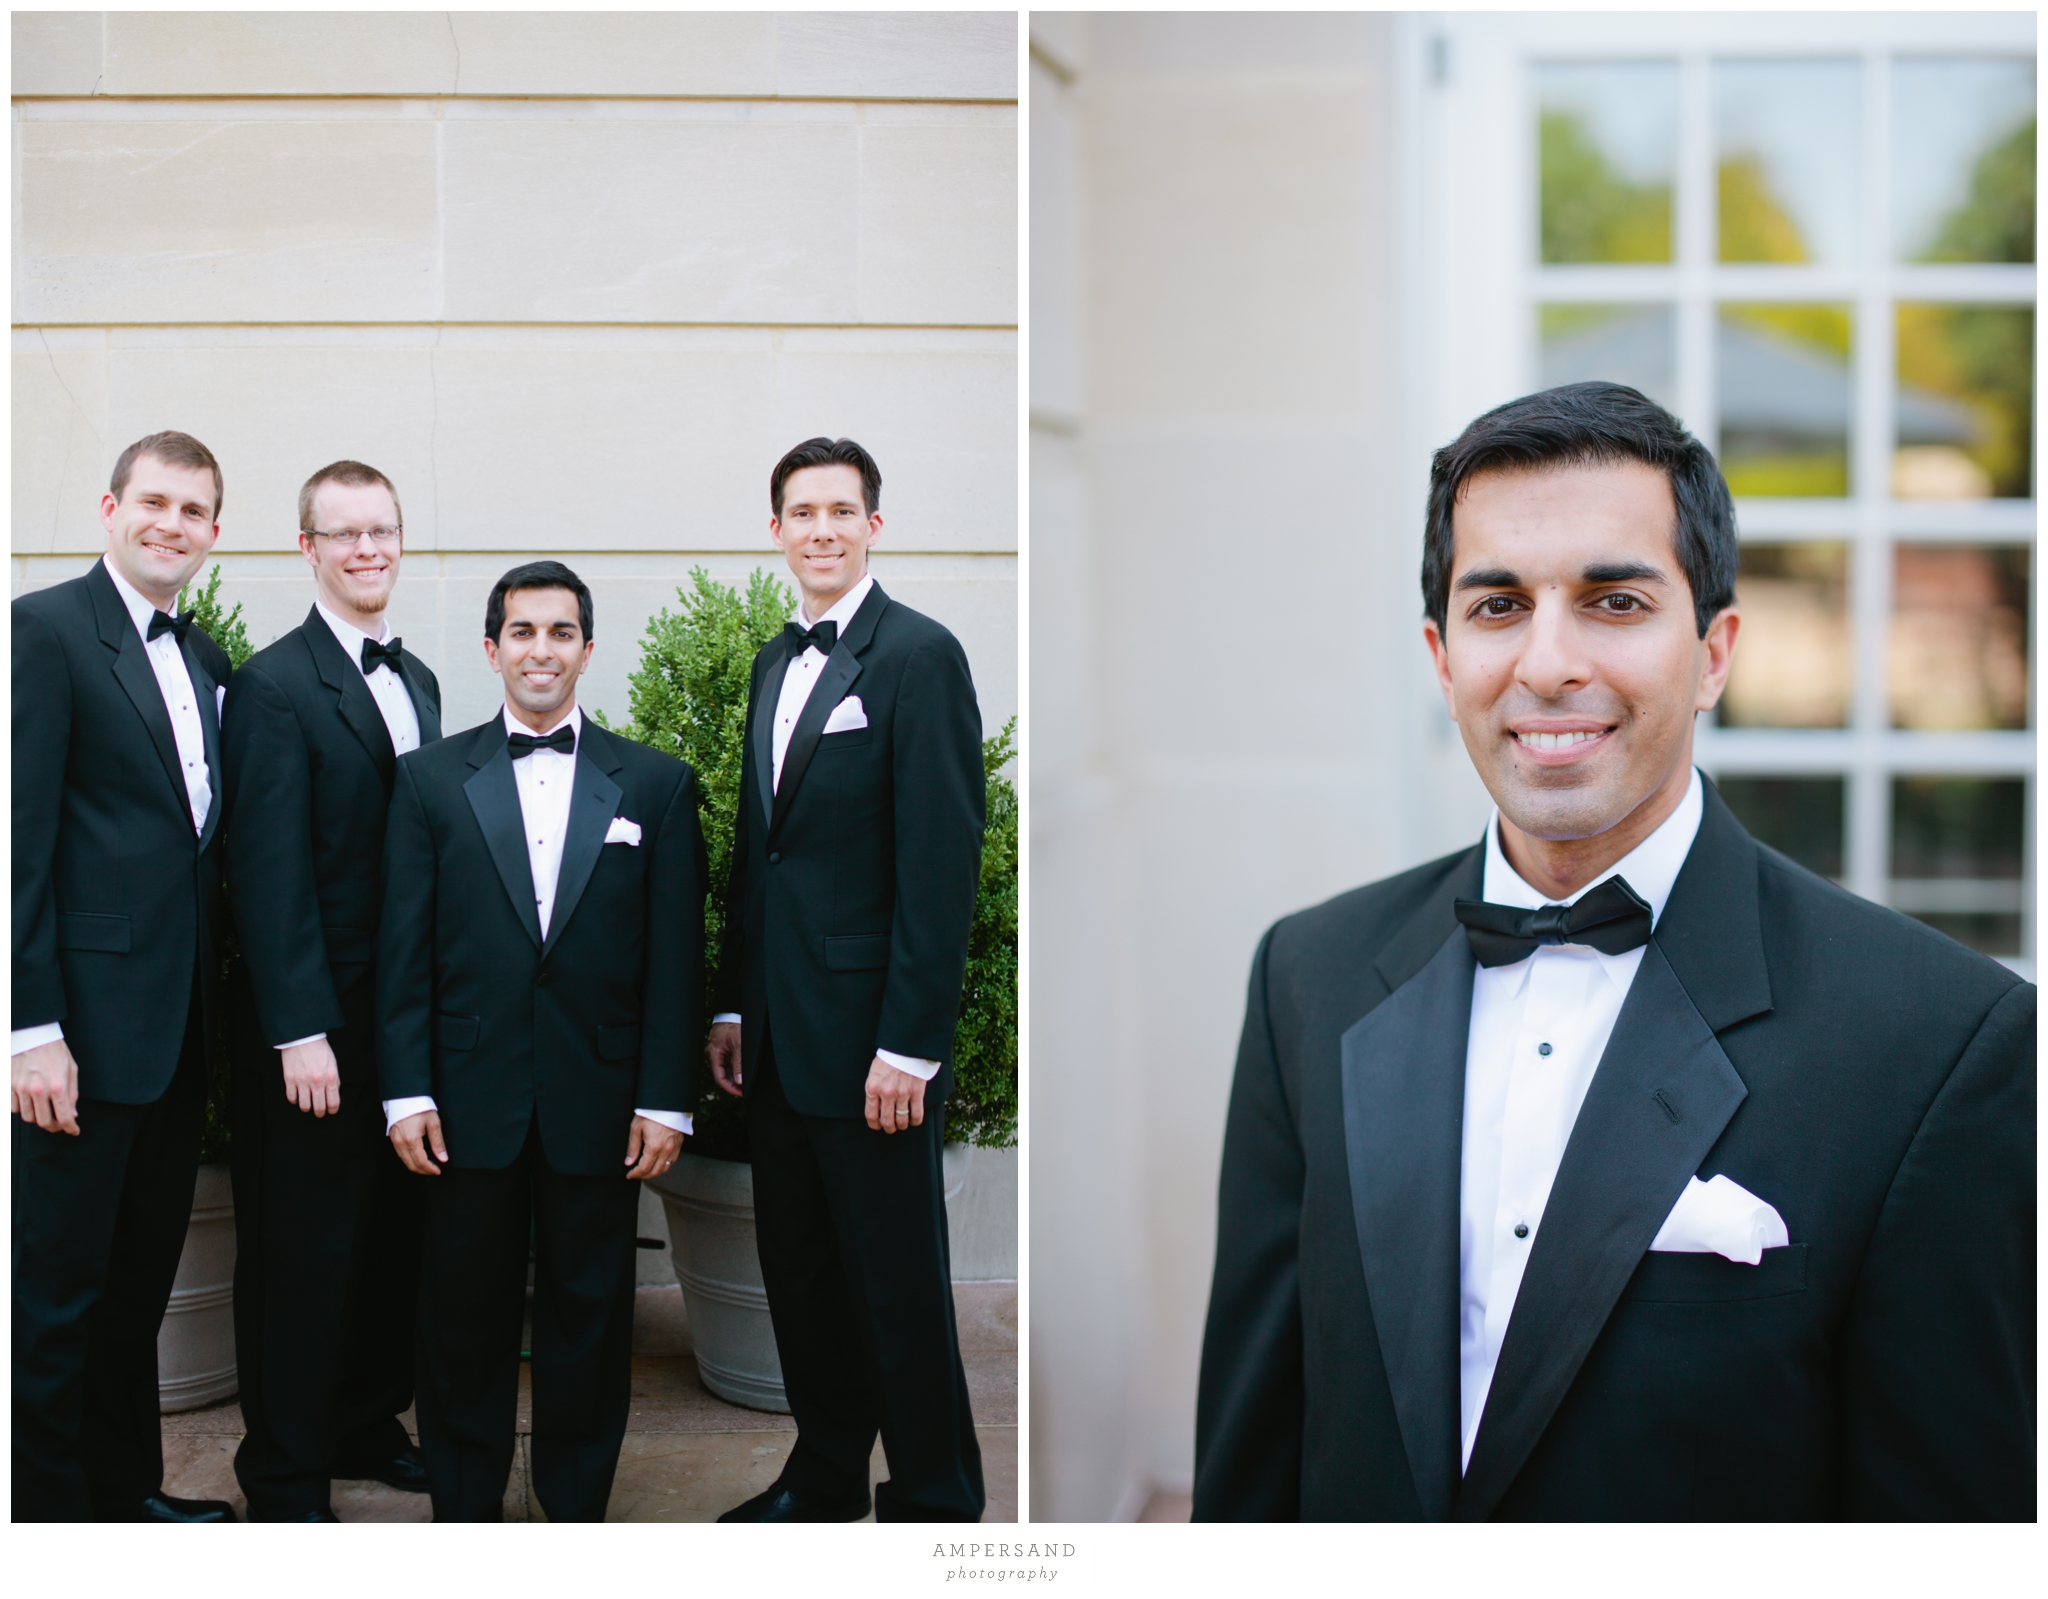 Handsome groomsmen  // Photos by Ampersand Photography